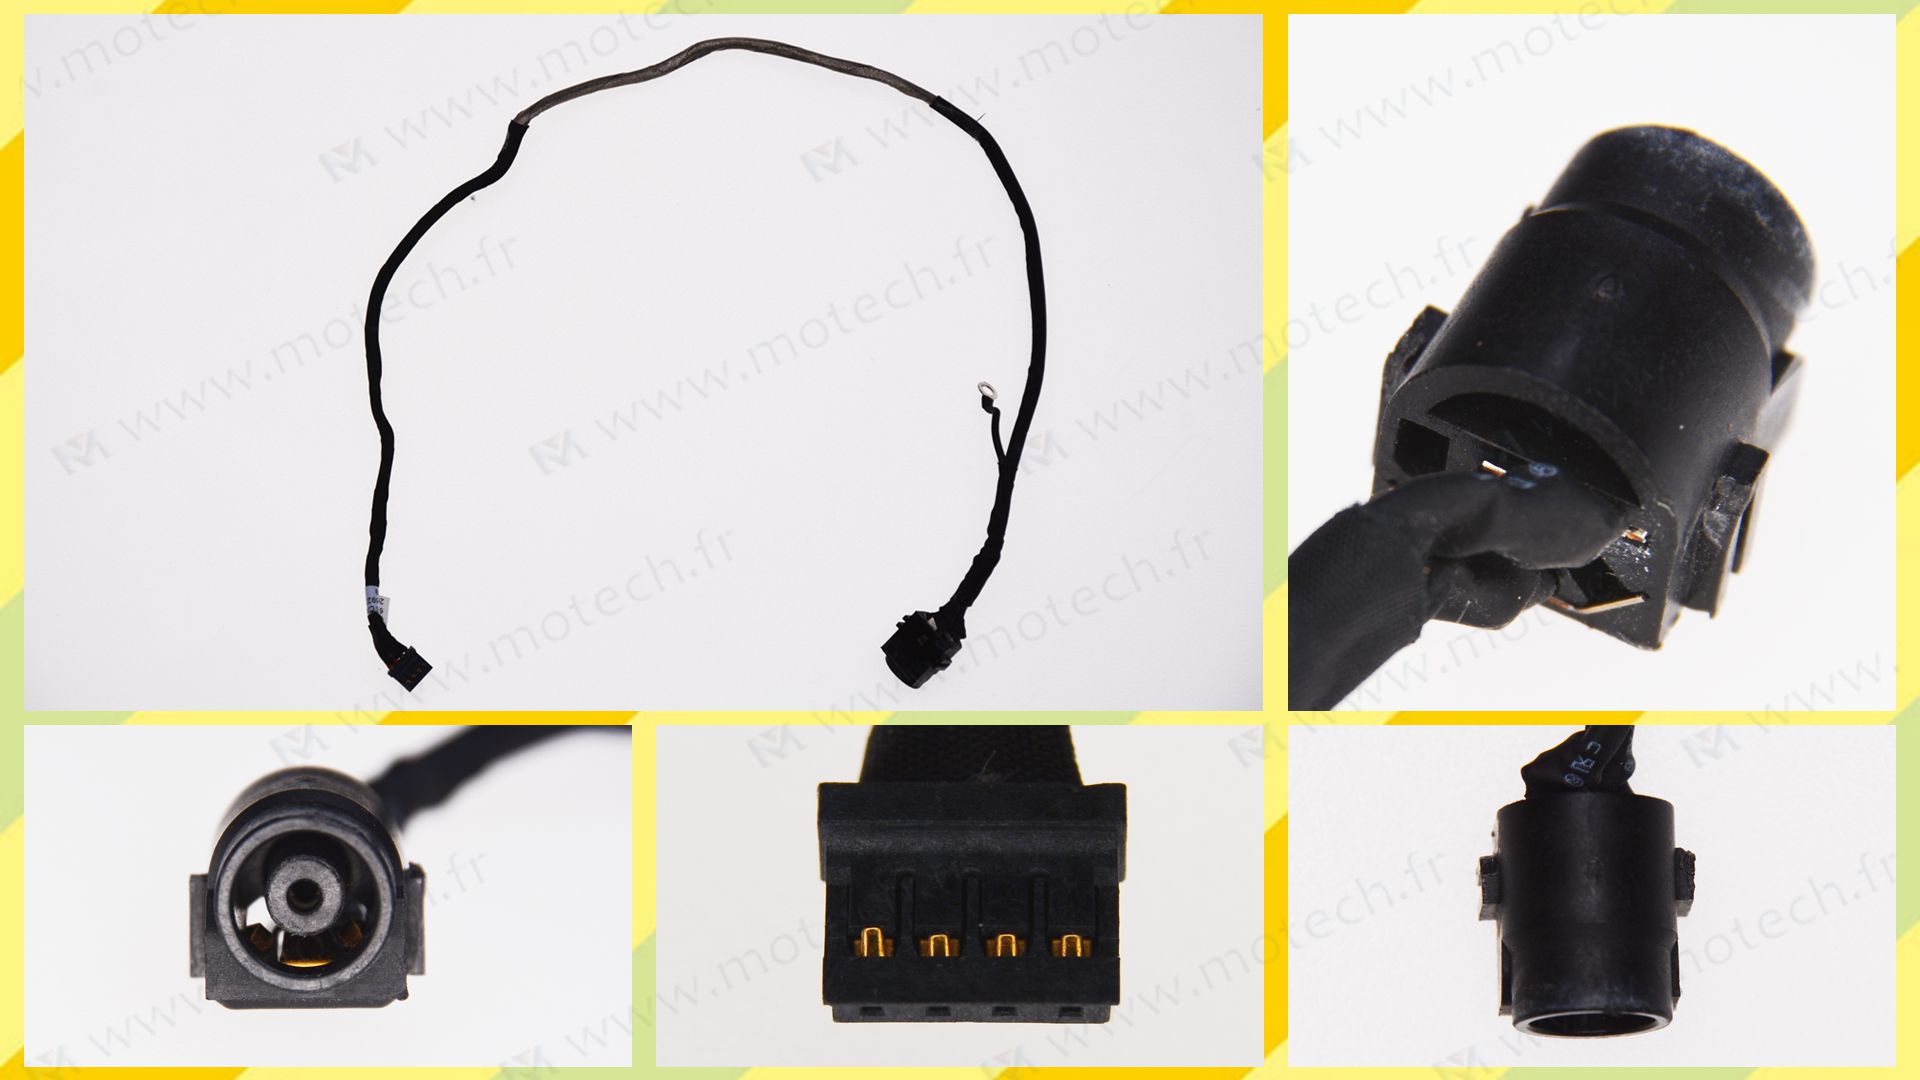 Sony VPCSB3AFX charging connector, Sony VPCSB3AFX DC Power Jack, Sony VPCSB3AFX DC IN Cable, Sony VPCSB3AFX Power Jack, Sony VPCSB3AFX plug, Sony VPCSB3AFX Jack socket, Sony VPCSB3AFX connecteur de charge, 